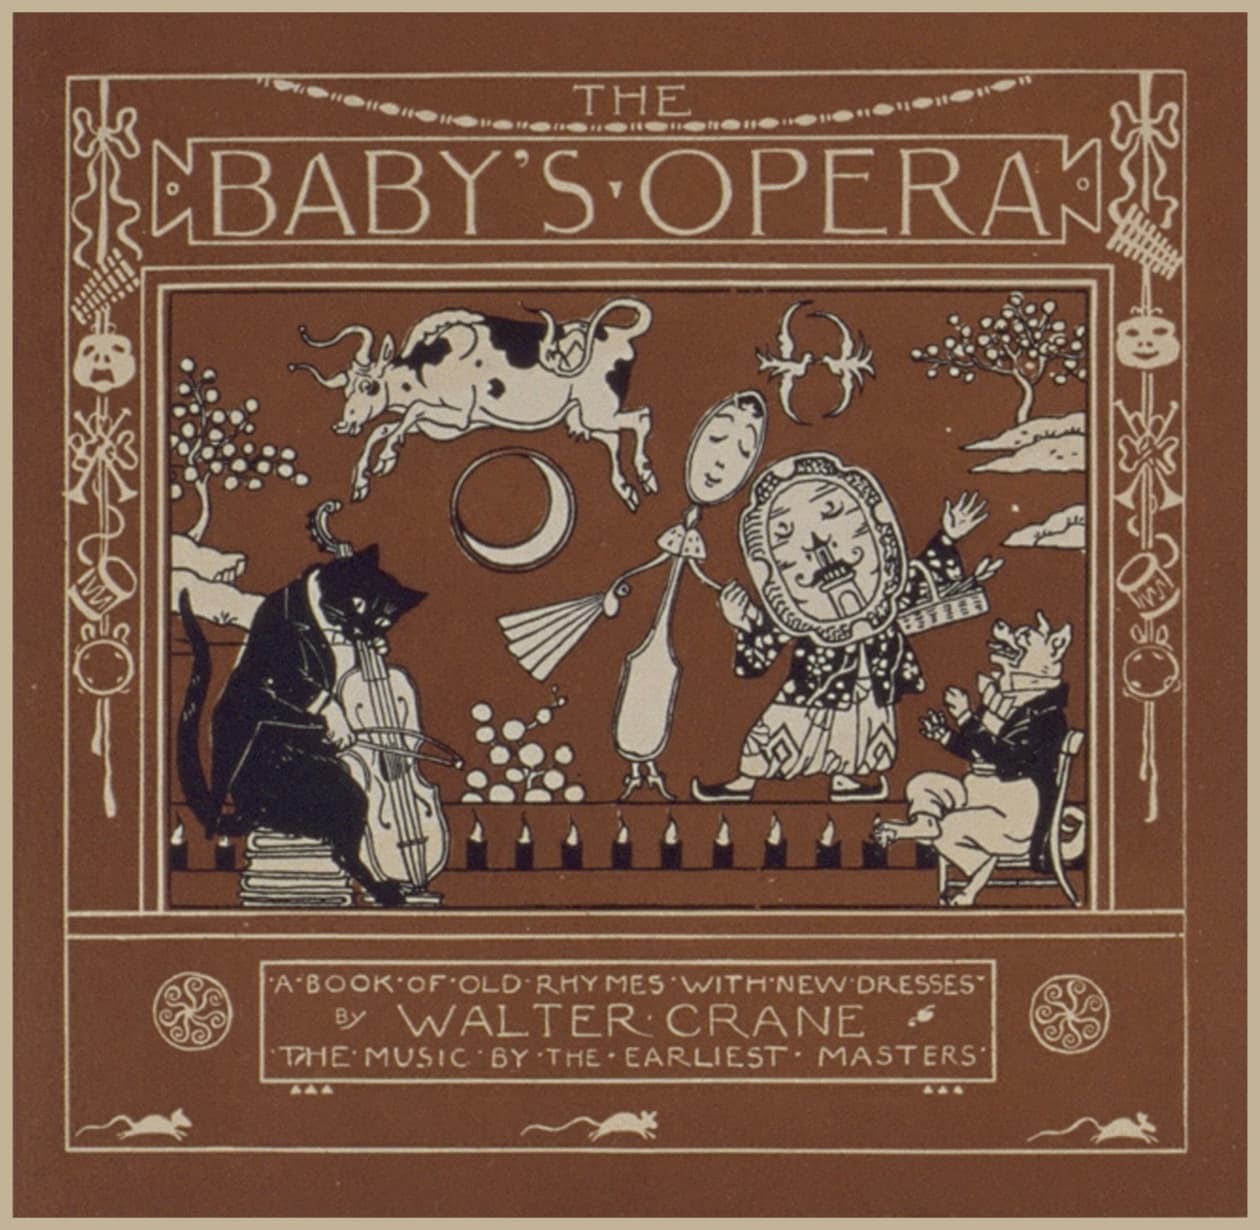 Front cover of The Baby’s Opera (page 10 of Triplets)